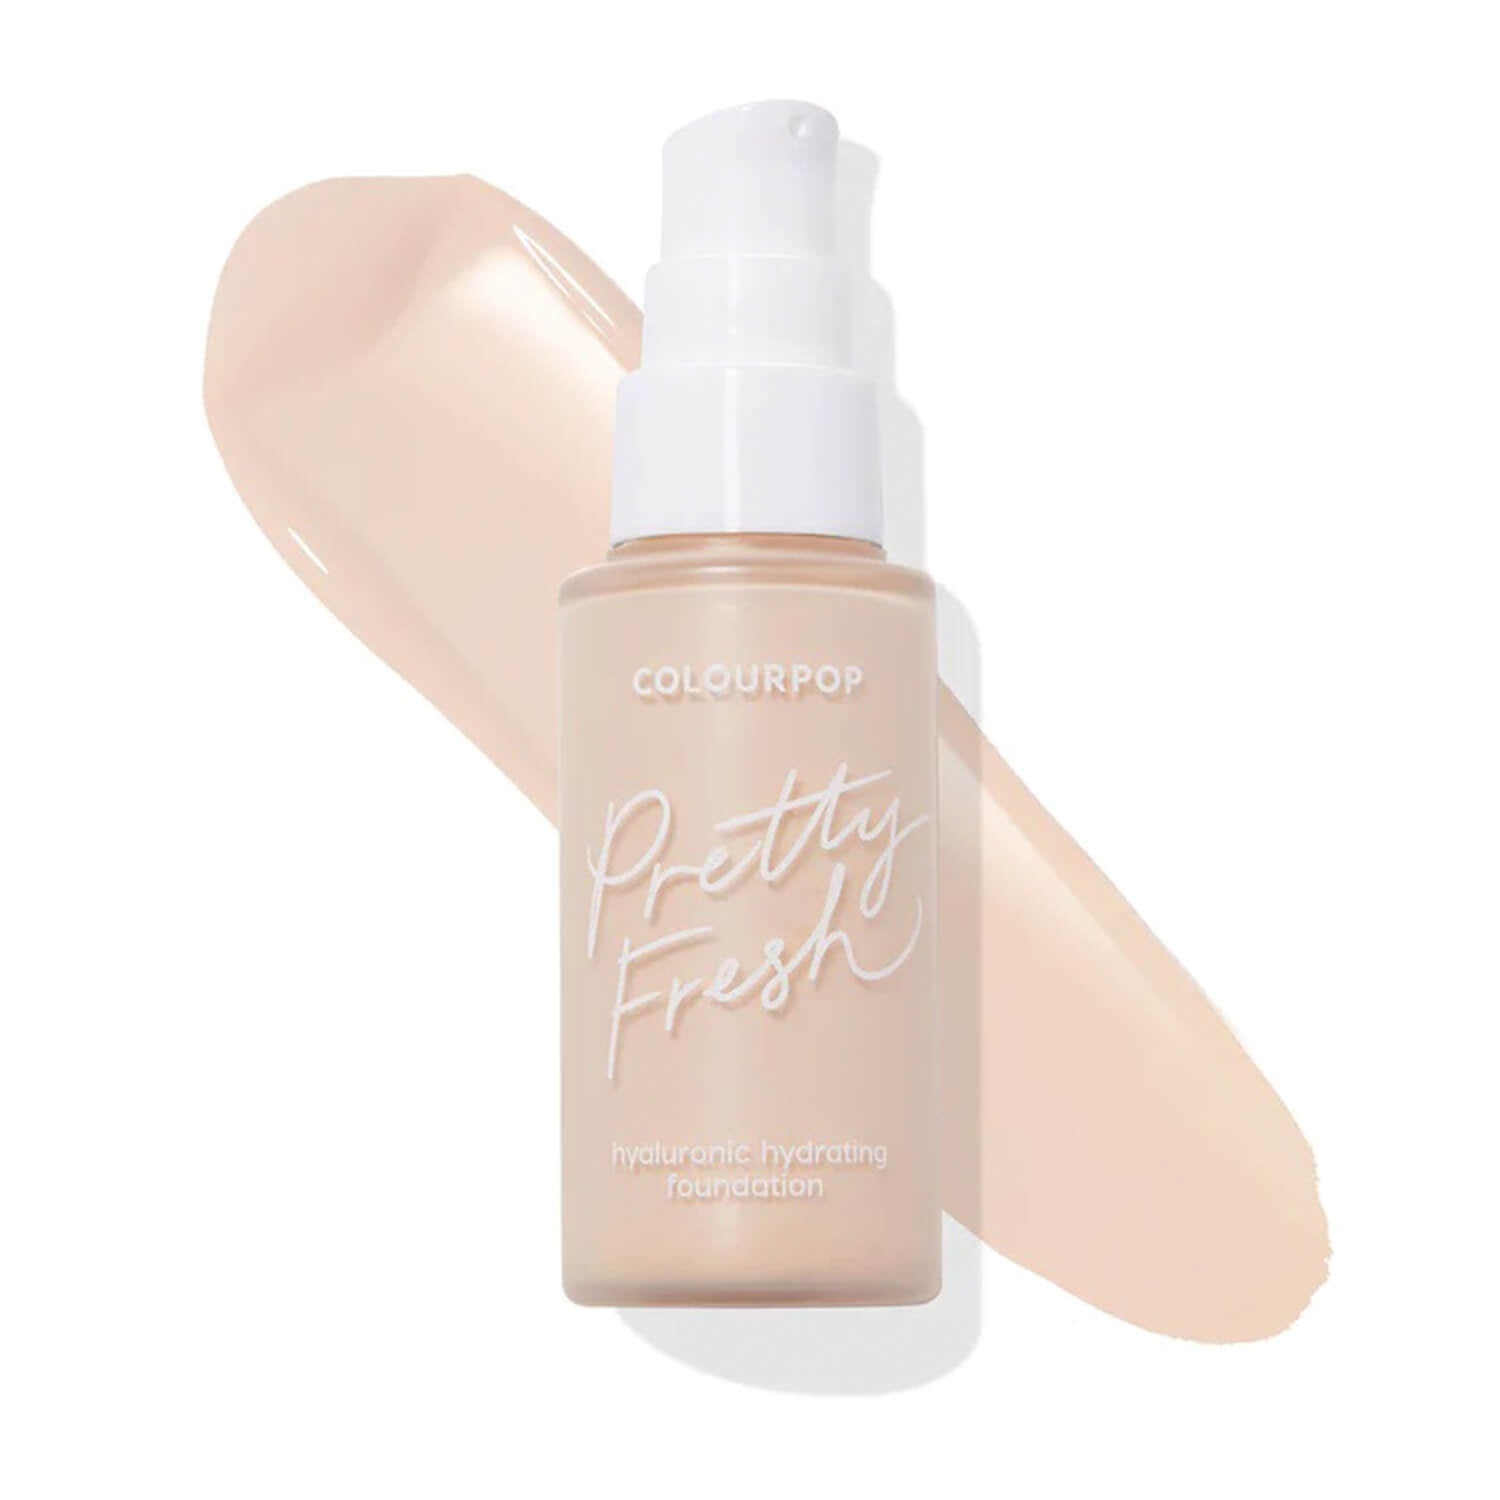 shop Colourpop Pretty Fresh Hyaluronic Foundation available at heygirl.pk for delivery in Pakistan